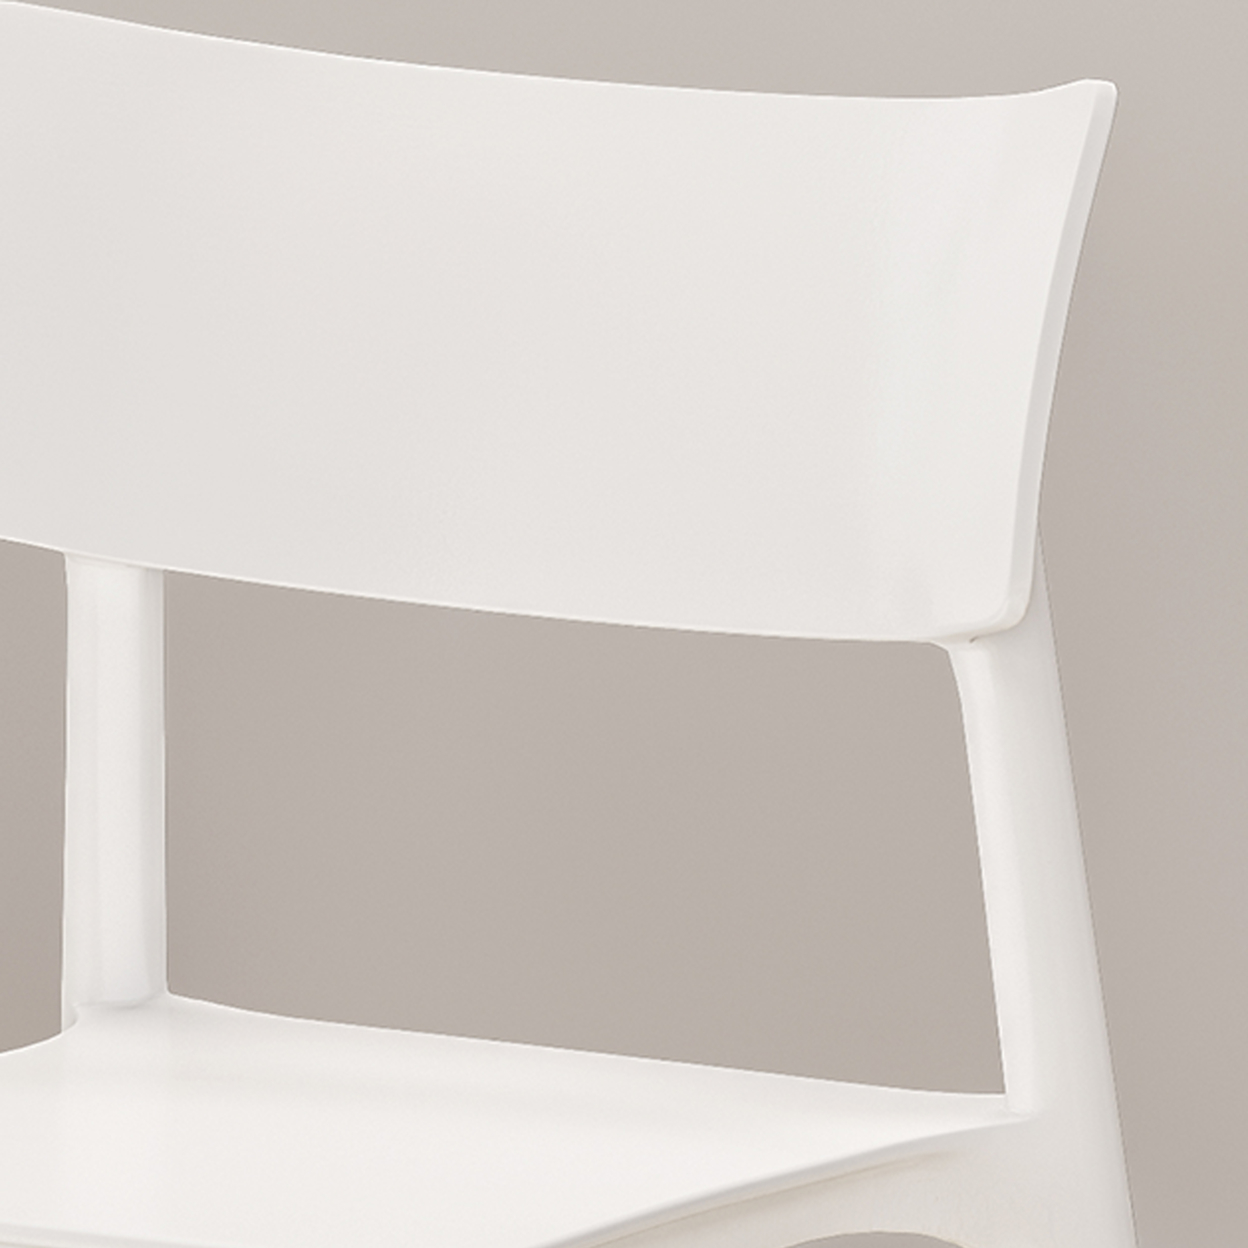 Isabel Modern Dining Chair With Beech Wood Legs (Set Of 2). White And Natural Finish - White + Natural